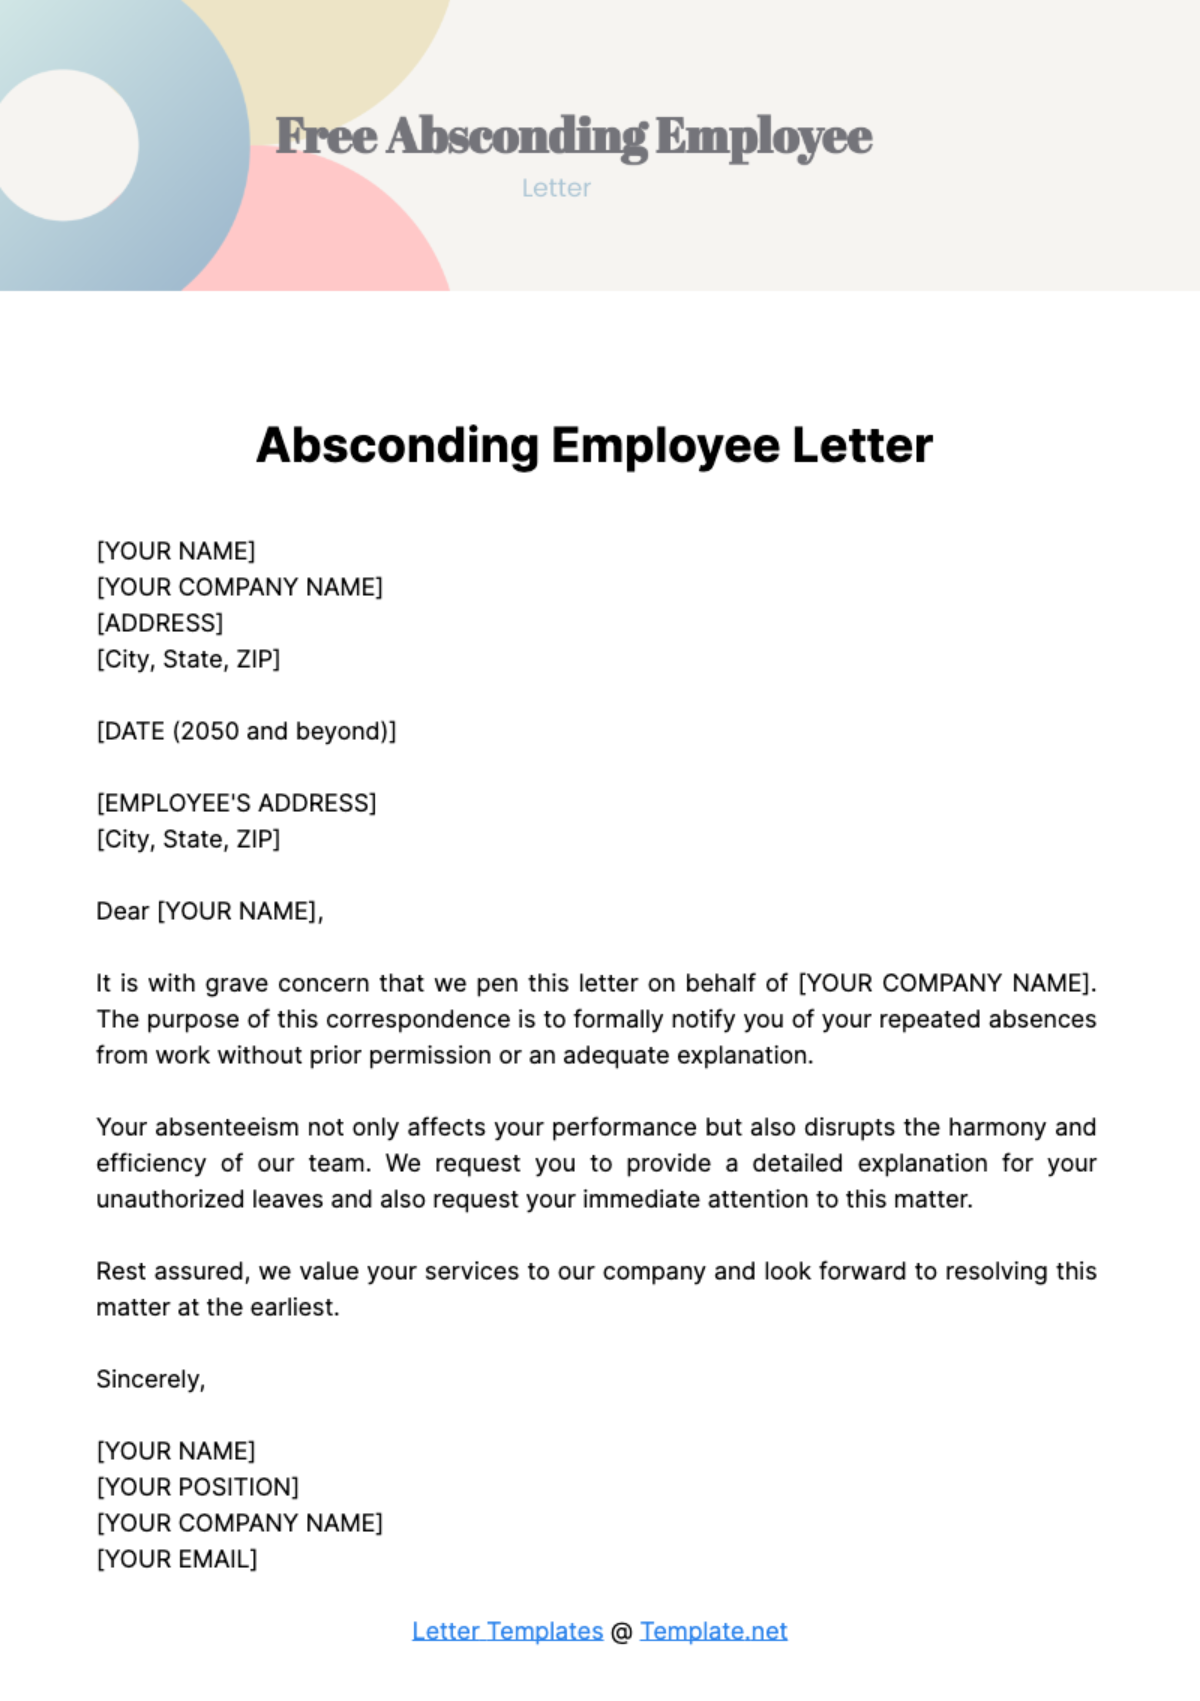 Absconding Employee Letter Template